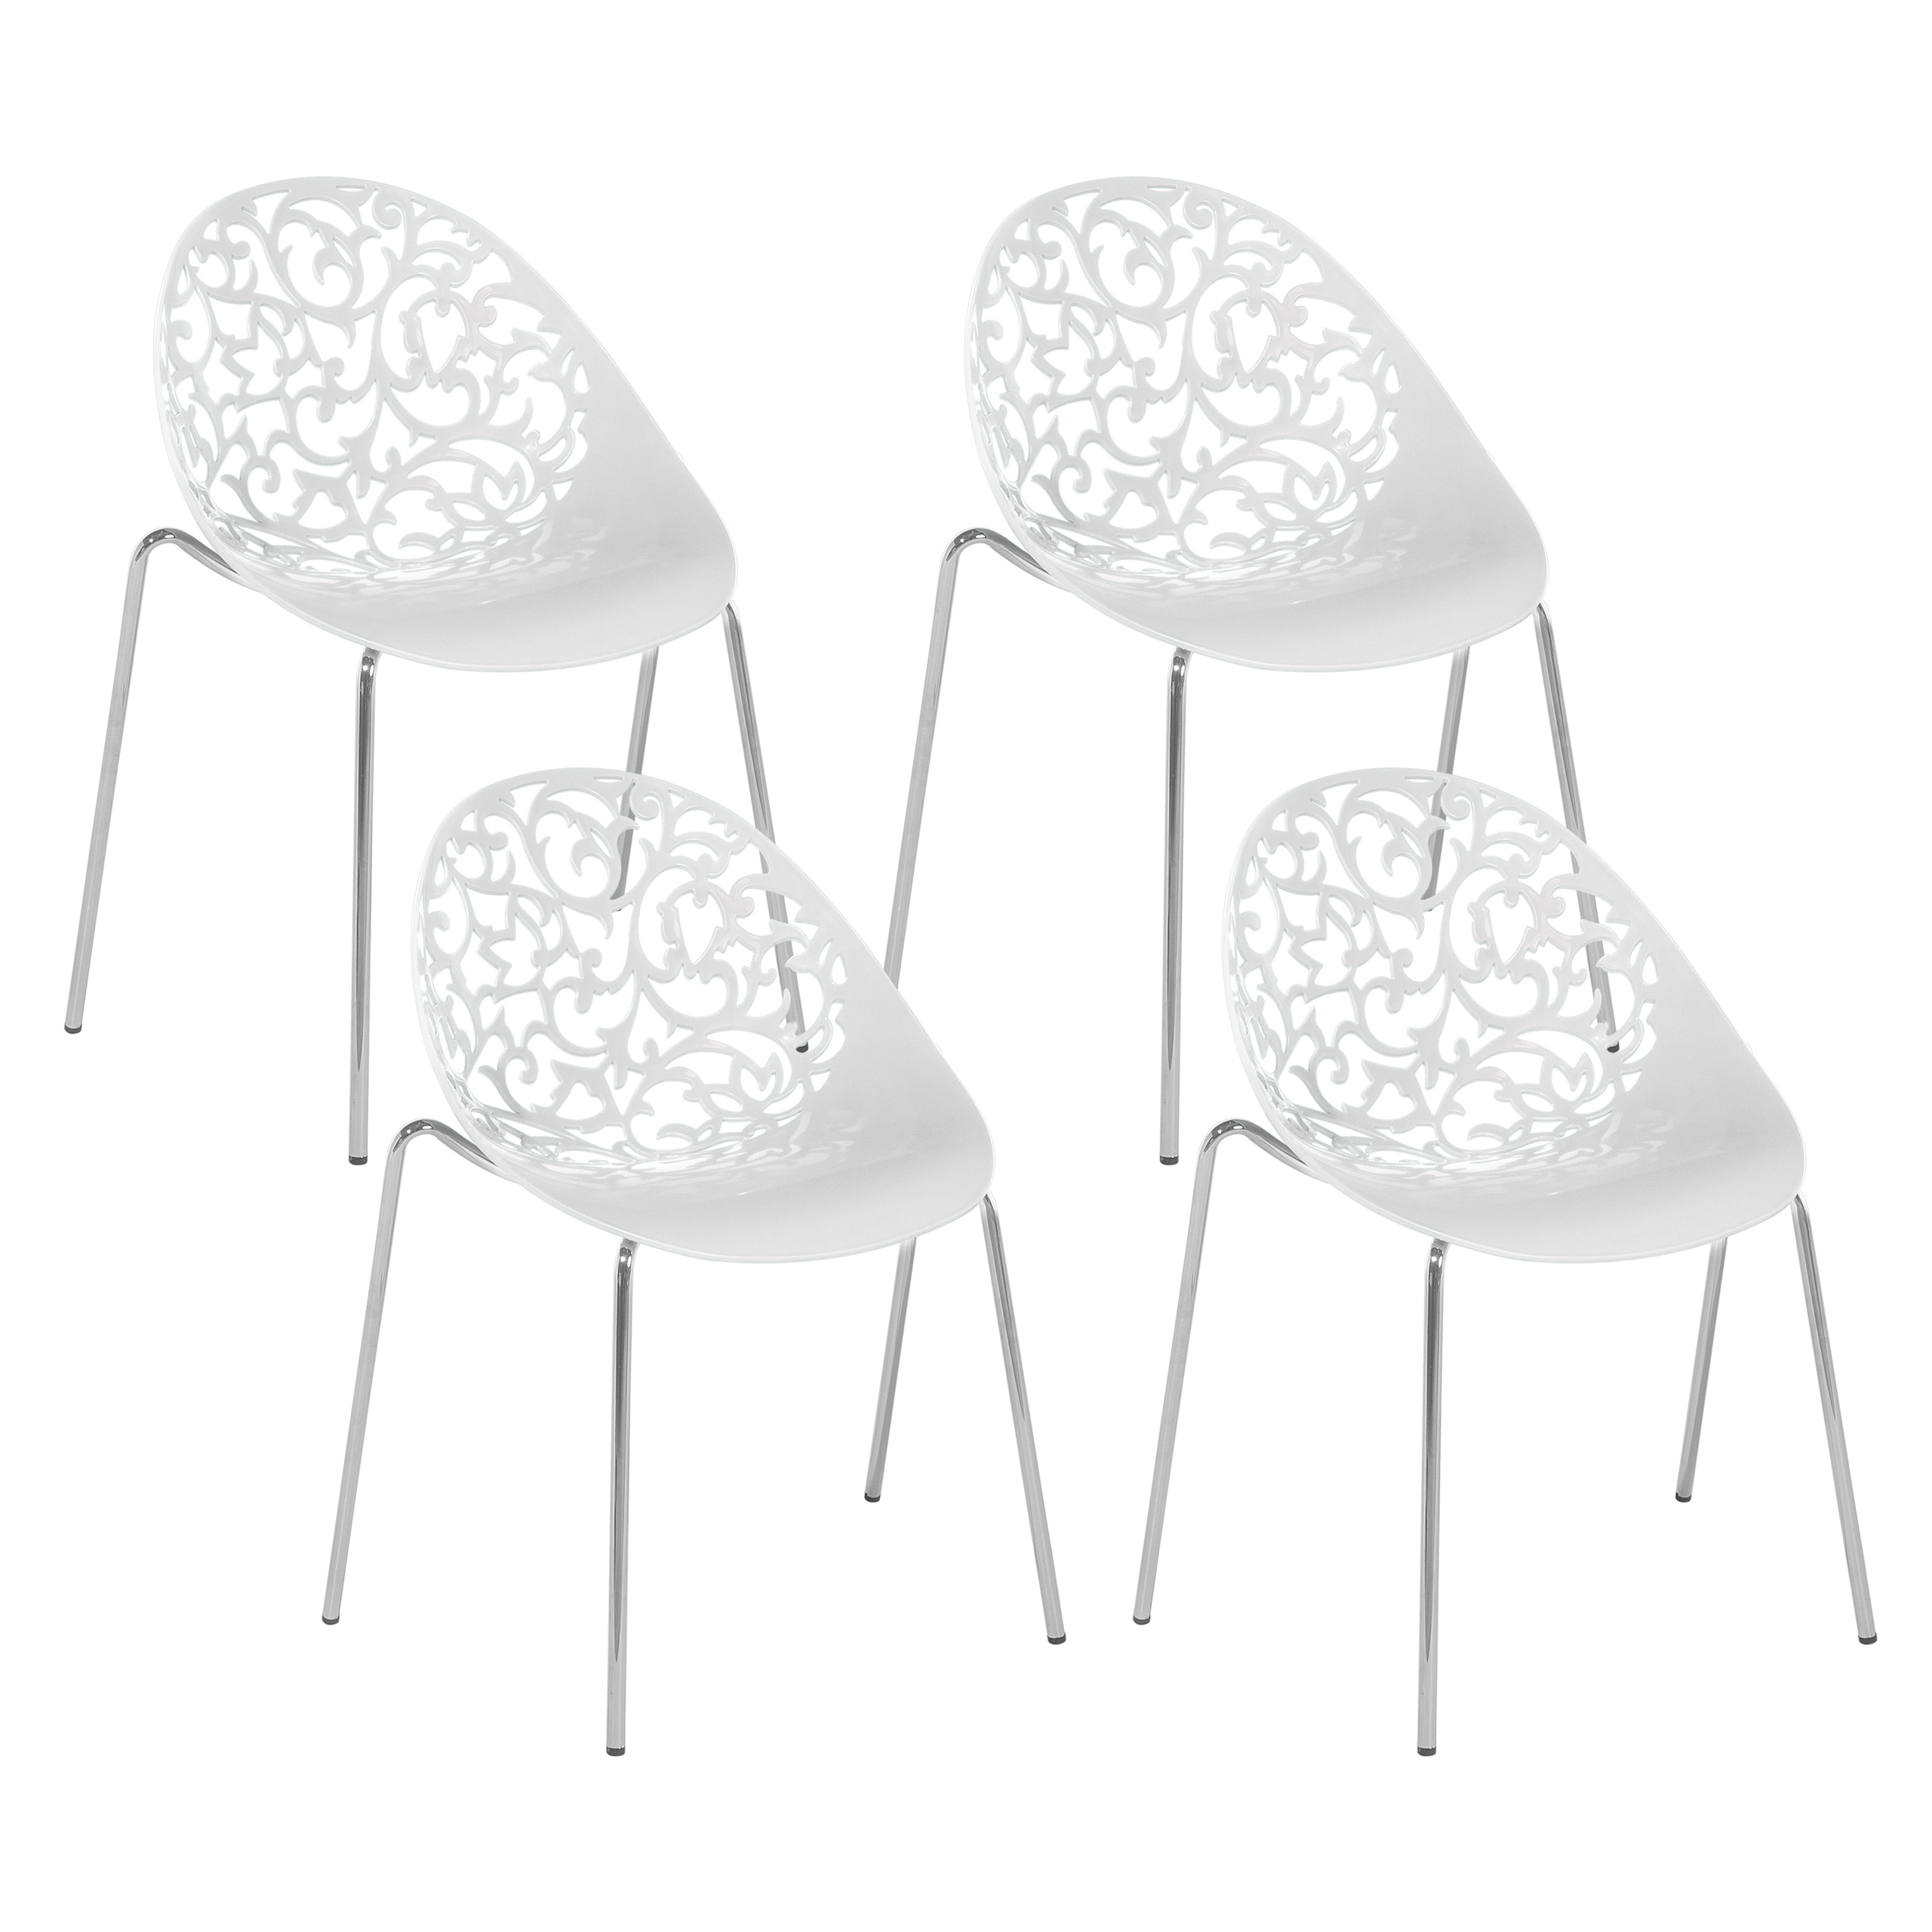 Beliani Set of 4 Dining Chairs White Plastic Cut Out Modern